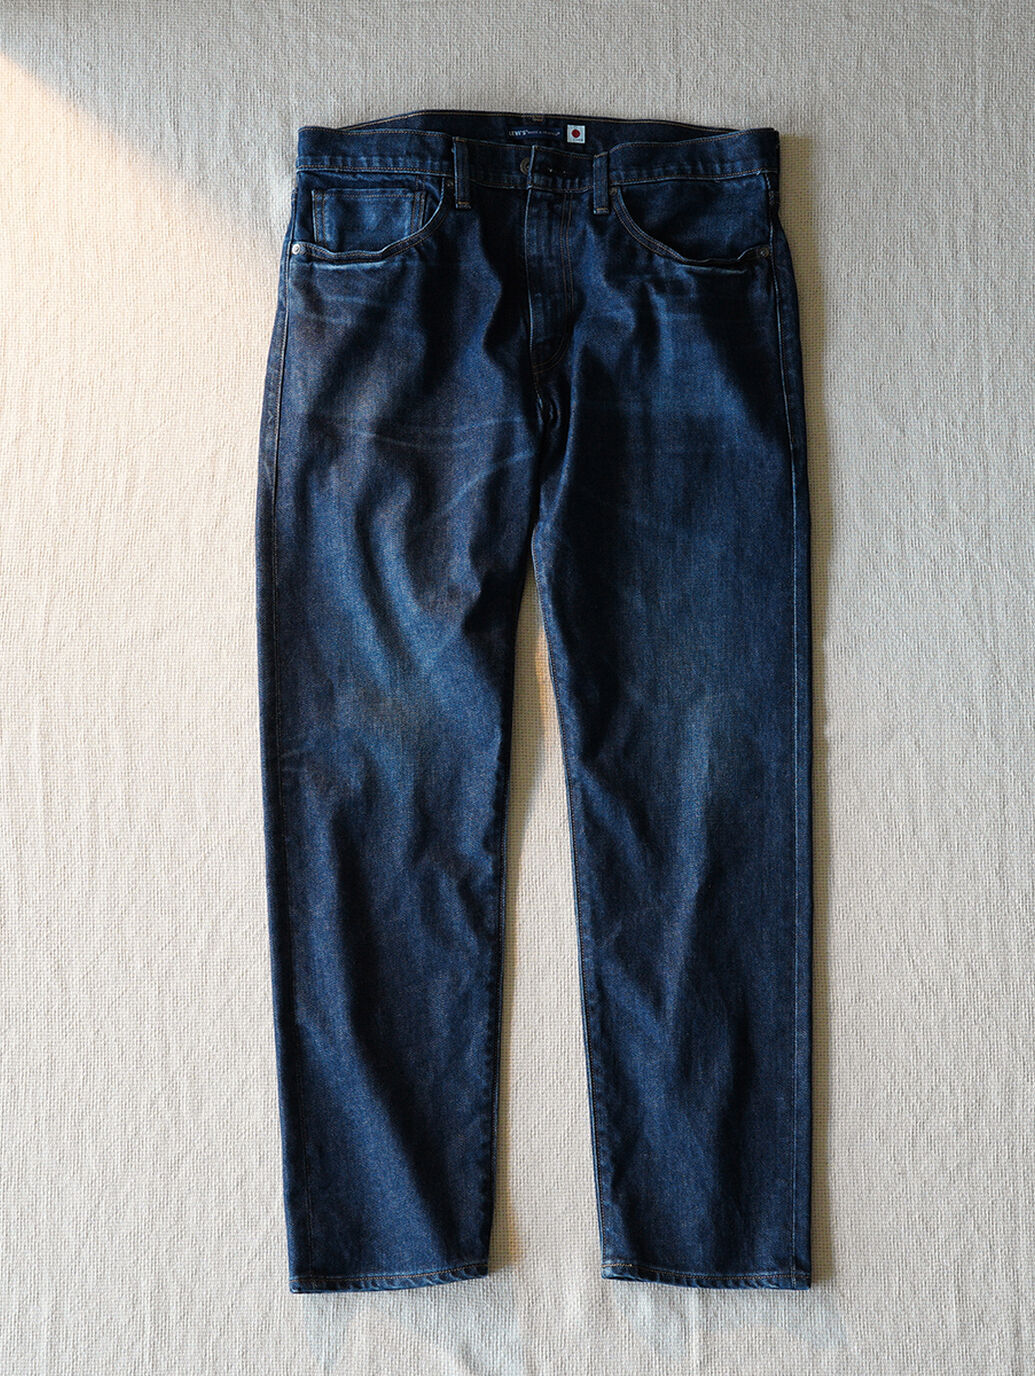 LEVI'S®MADE&CRAFTED®502™ MATSU MADE IN JAPAN｜リーバイス® 公式通販